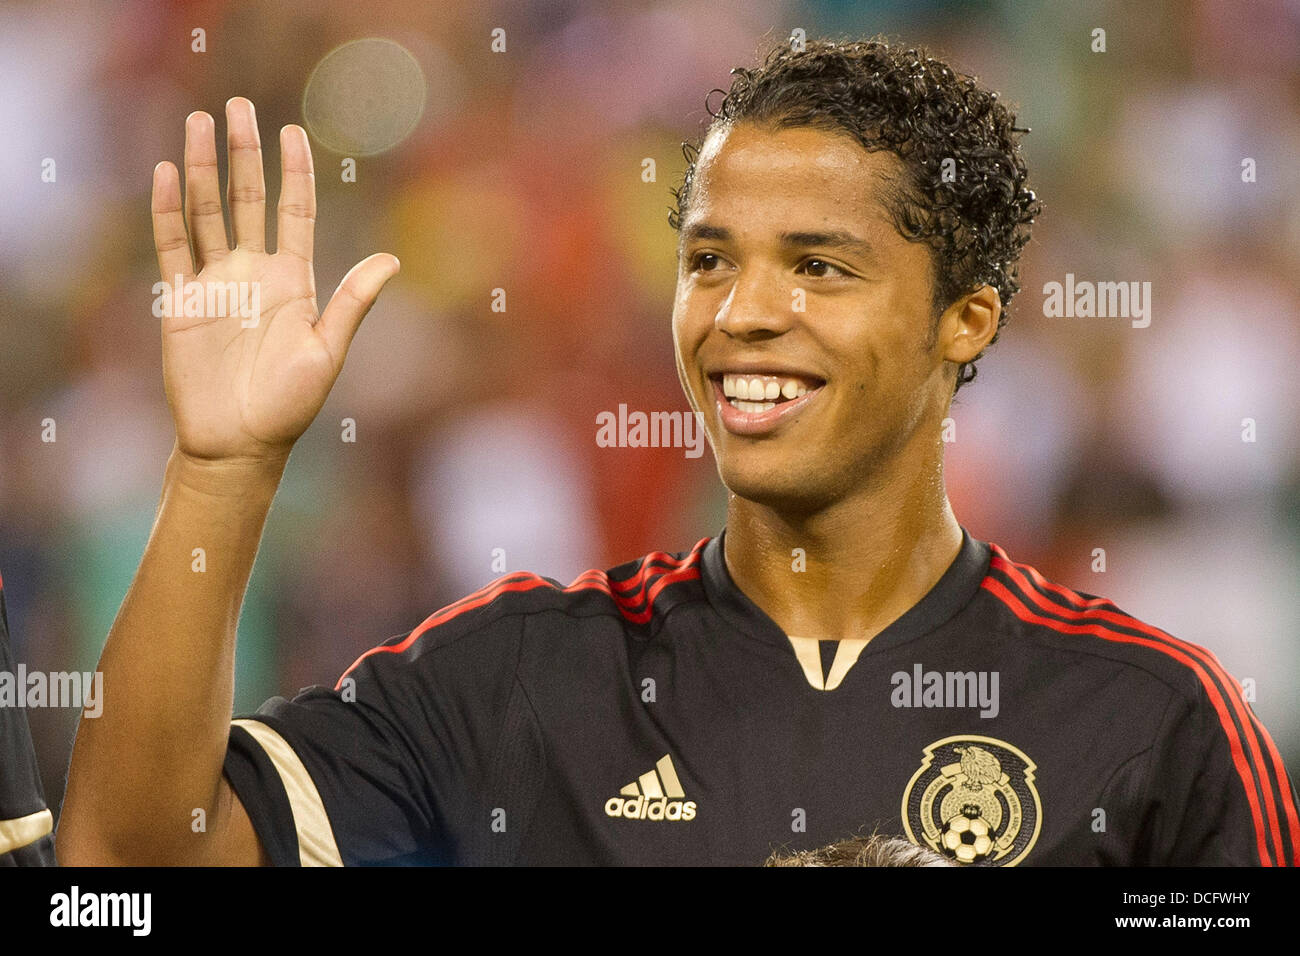 Aug. 14, 2013 - East Rutherford, New Jersey, U.S - August 14, 2013: Mexico National Team midfielder Giovani Dos Santos (10) smiles and waves to the crowd prior to the International friendly match between Mexico and Ivory Coast at Met Life Stadium, East Rutherford, NJ. Mexico defeated Ivory Coast 4-1. Stock Photo